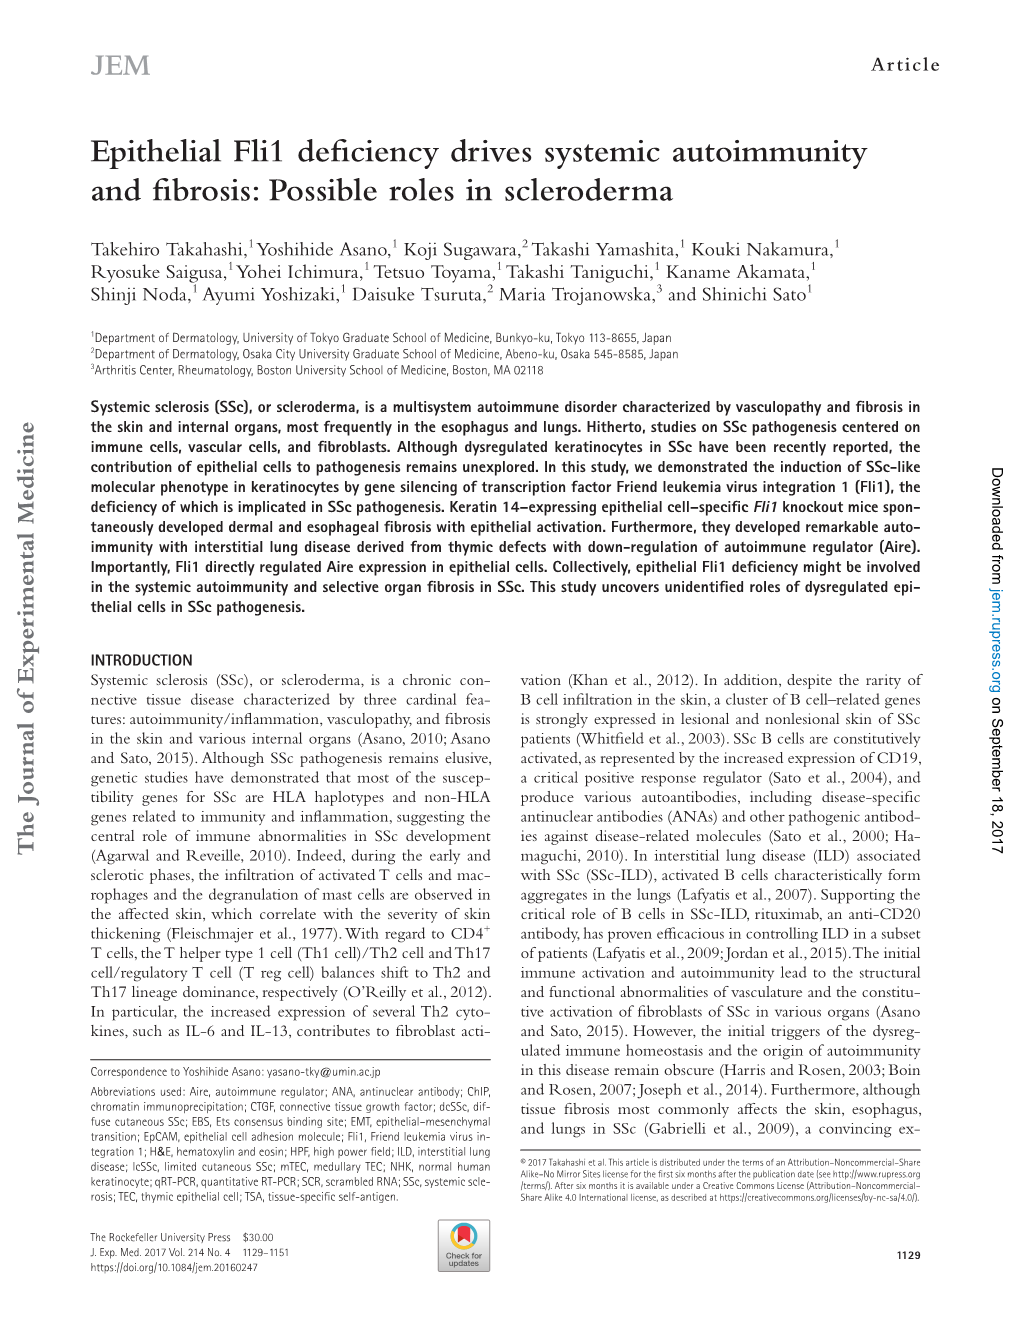 Epithelial Fli1 Deficiency Drives Systemic Autoimmunity and Fibrosis: Possible Roles in Scleroderma